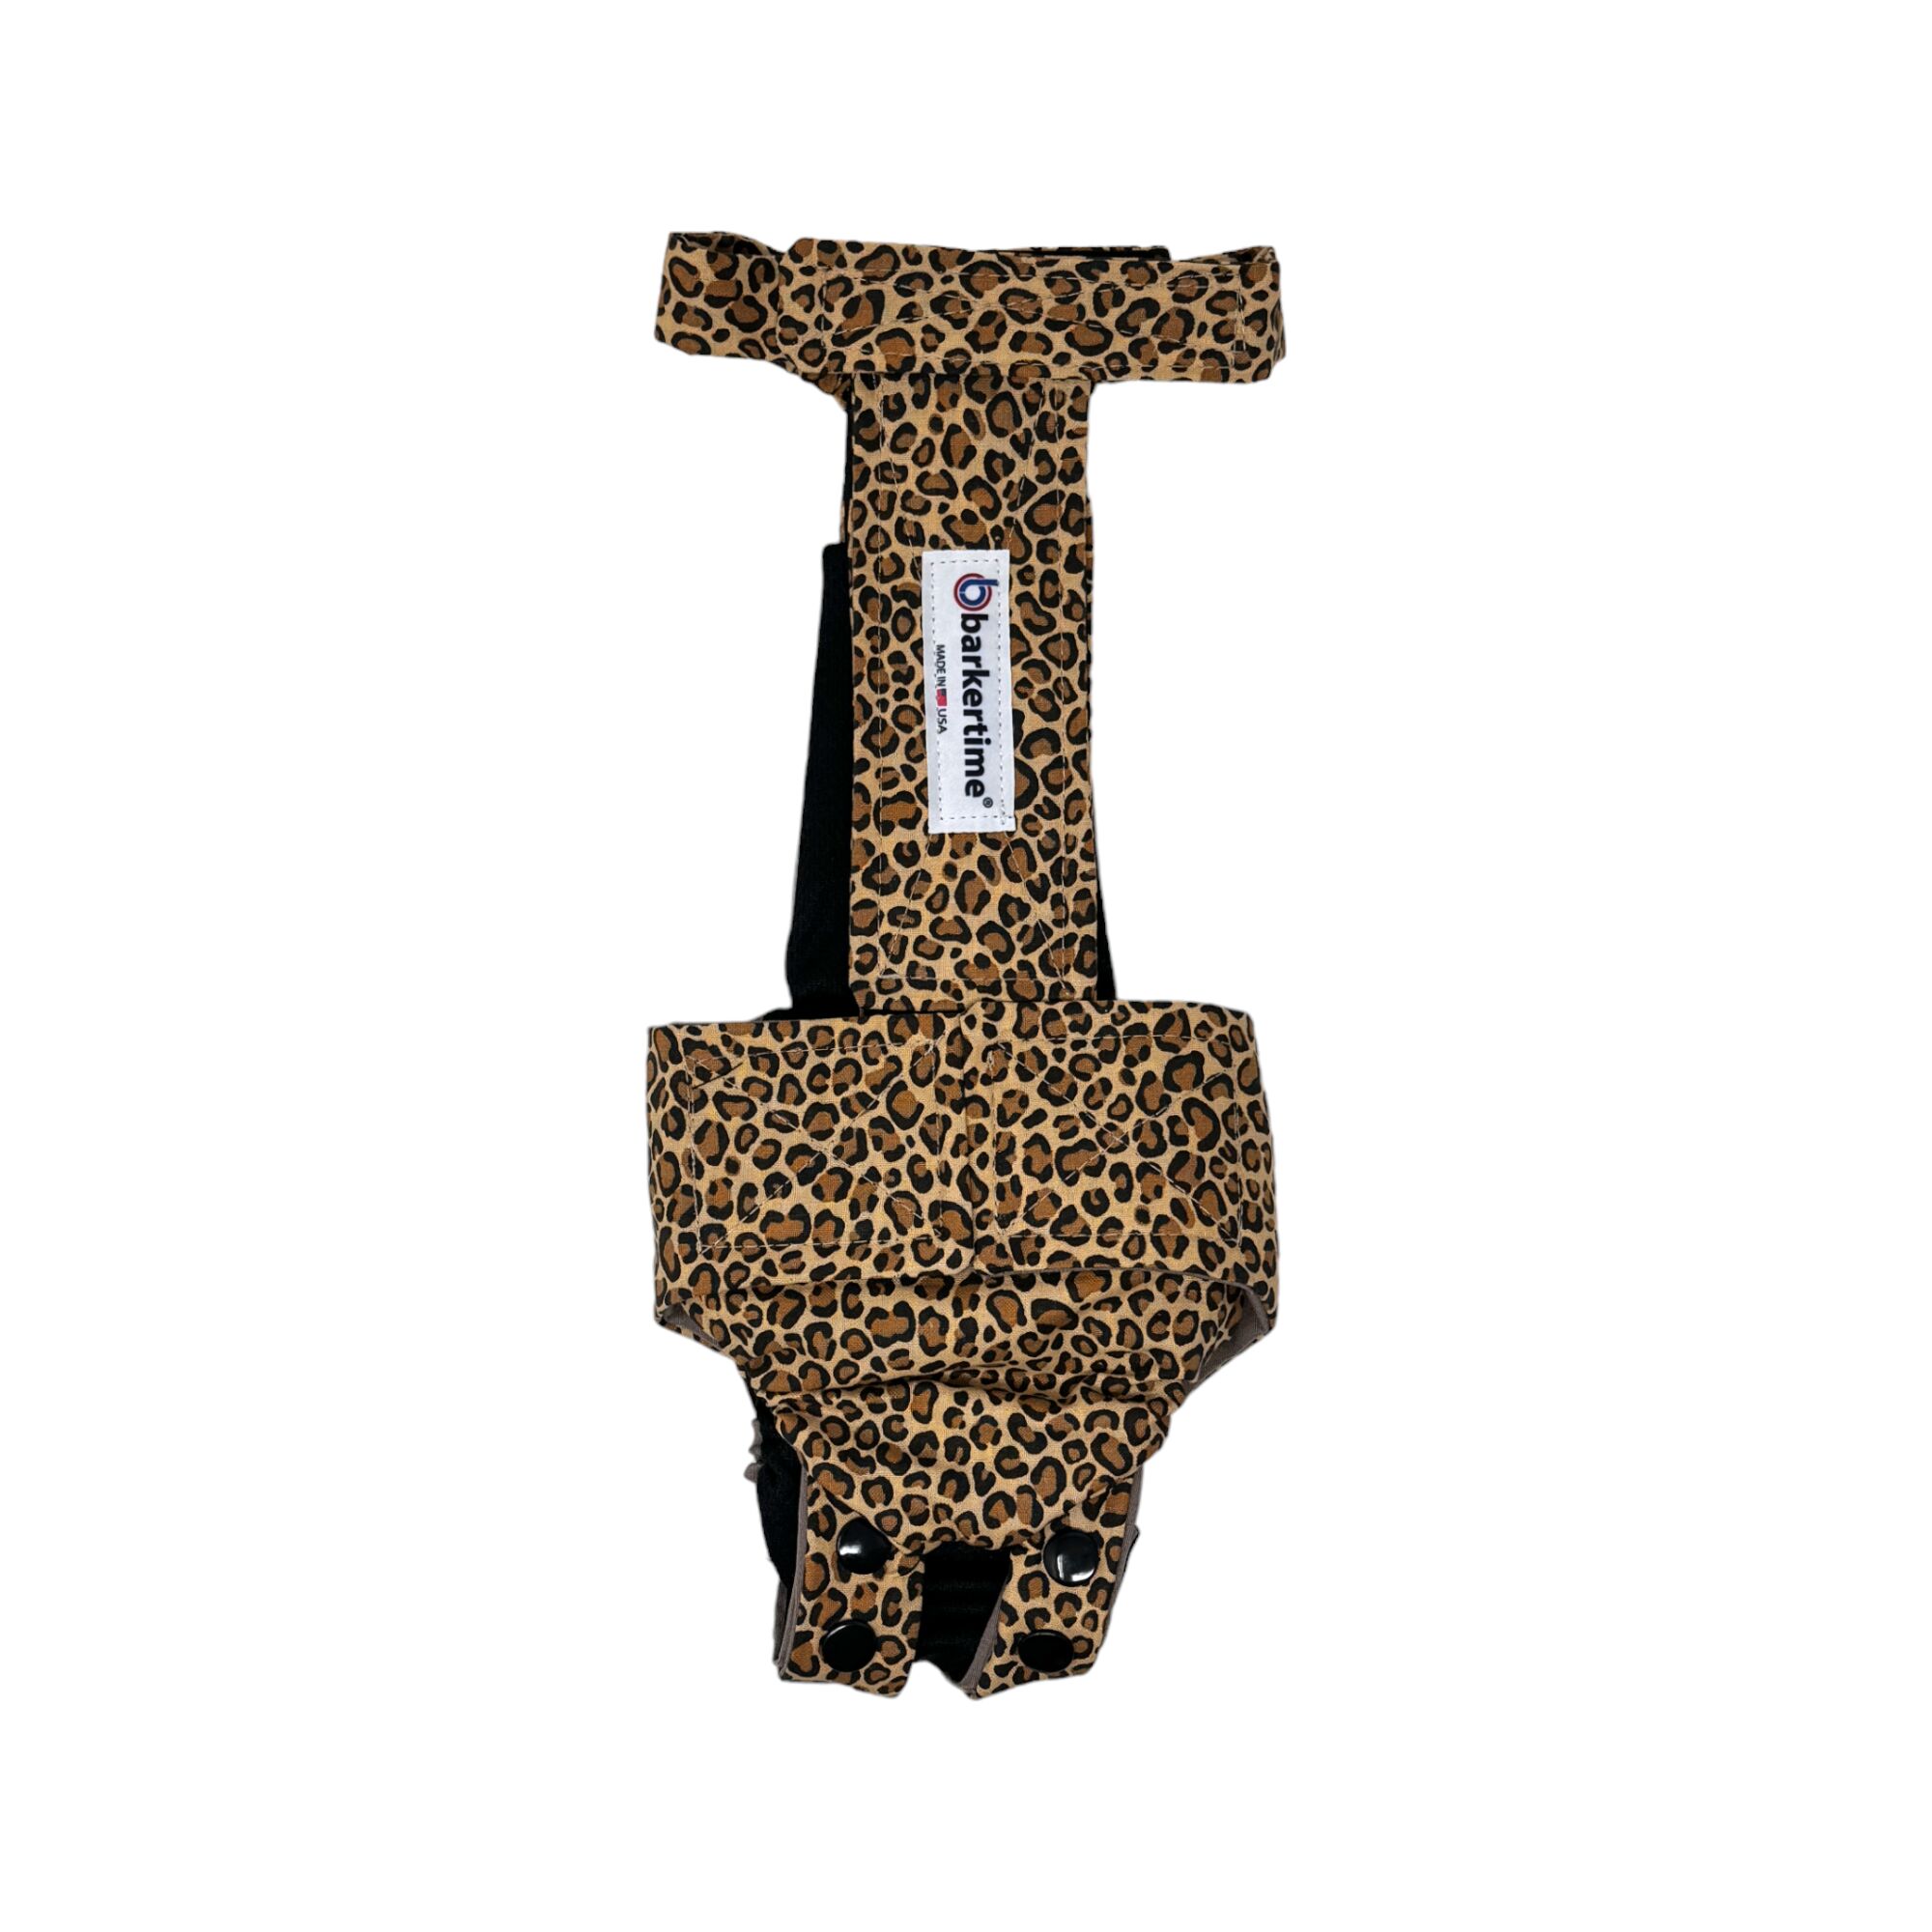 Leopard Dog Diaper Snappy Overall